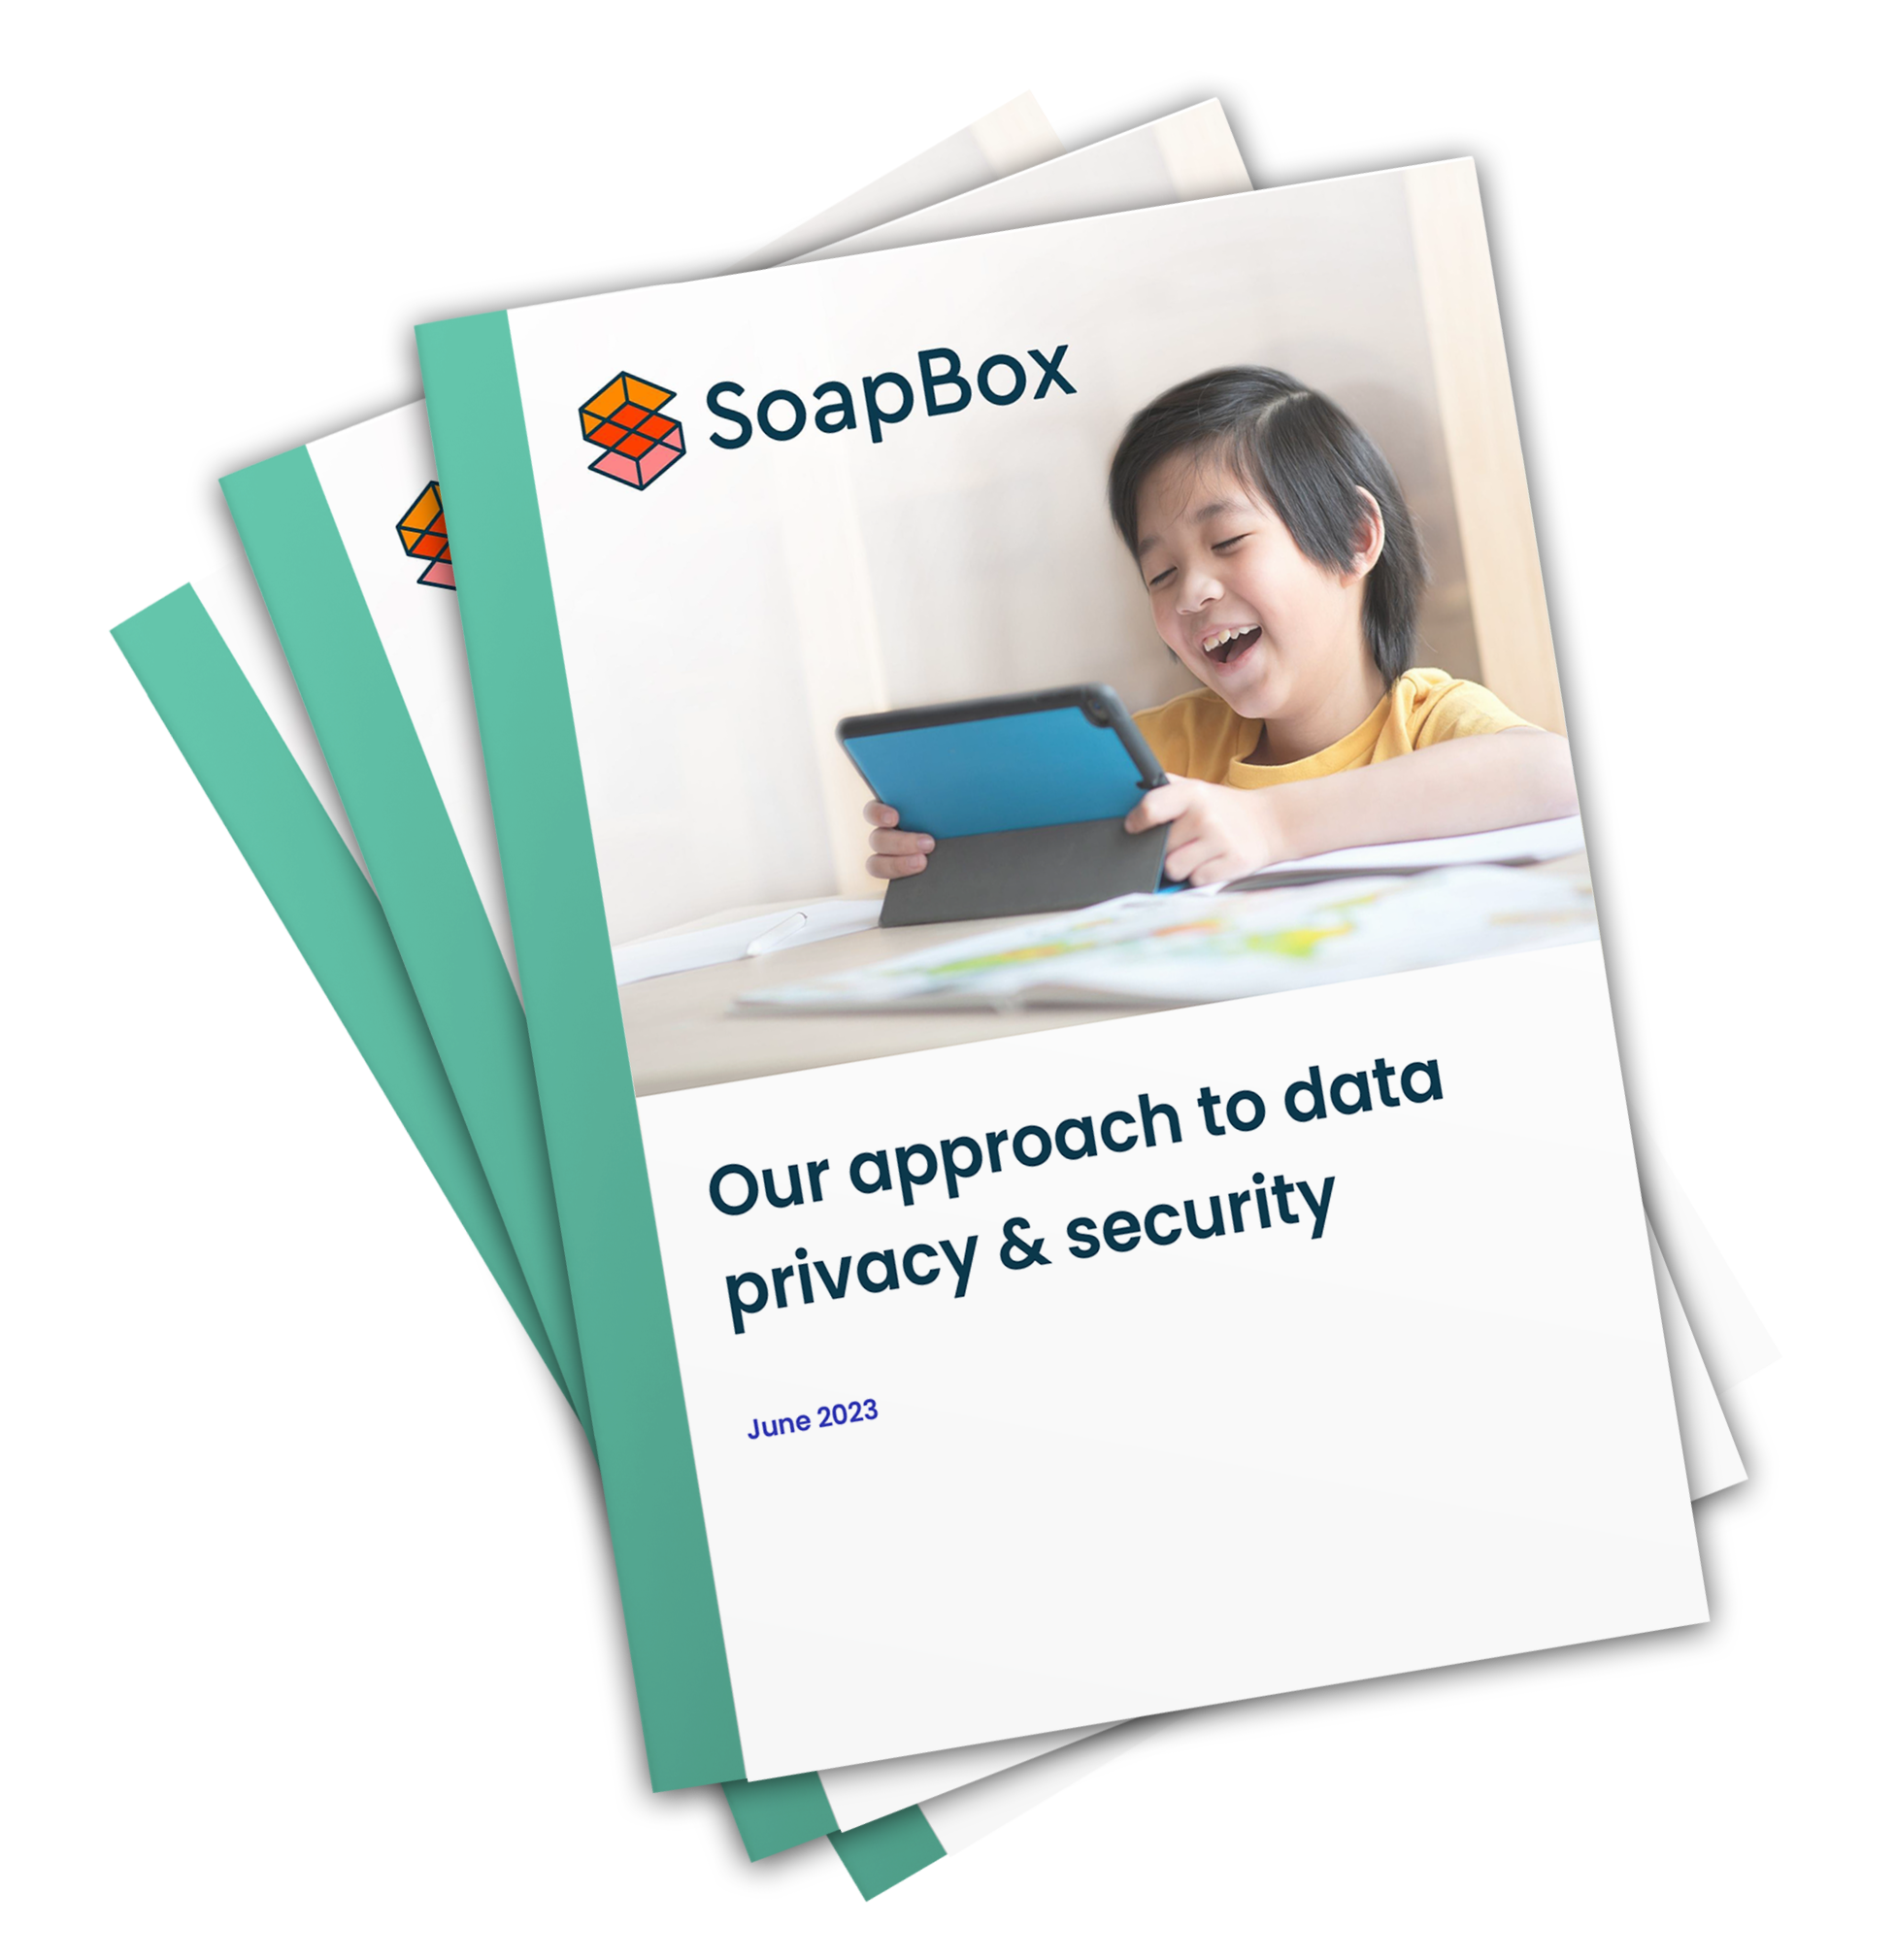 About SoapBoxs privacy by design approach to our data and technology 5.png